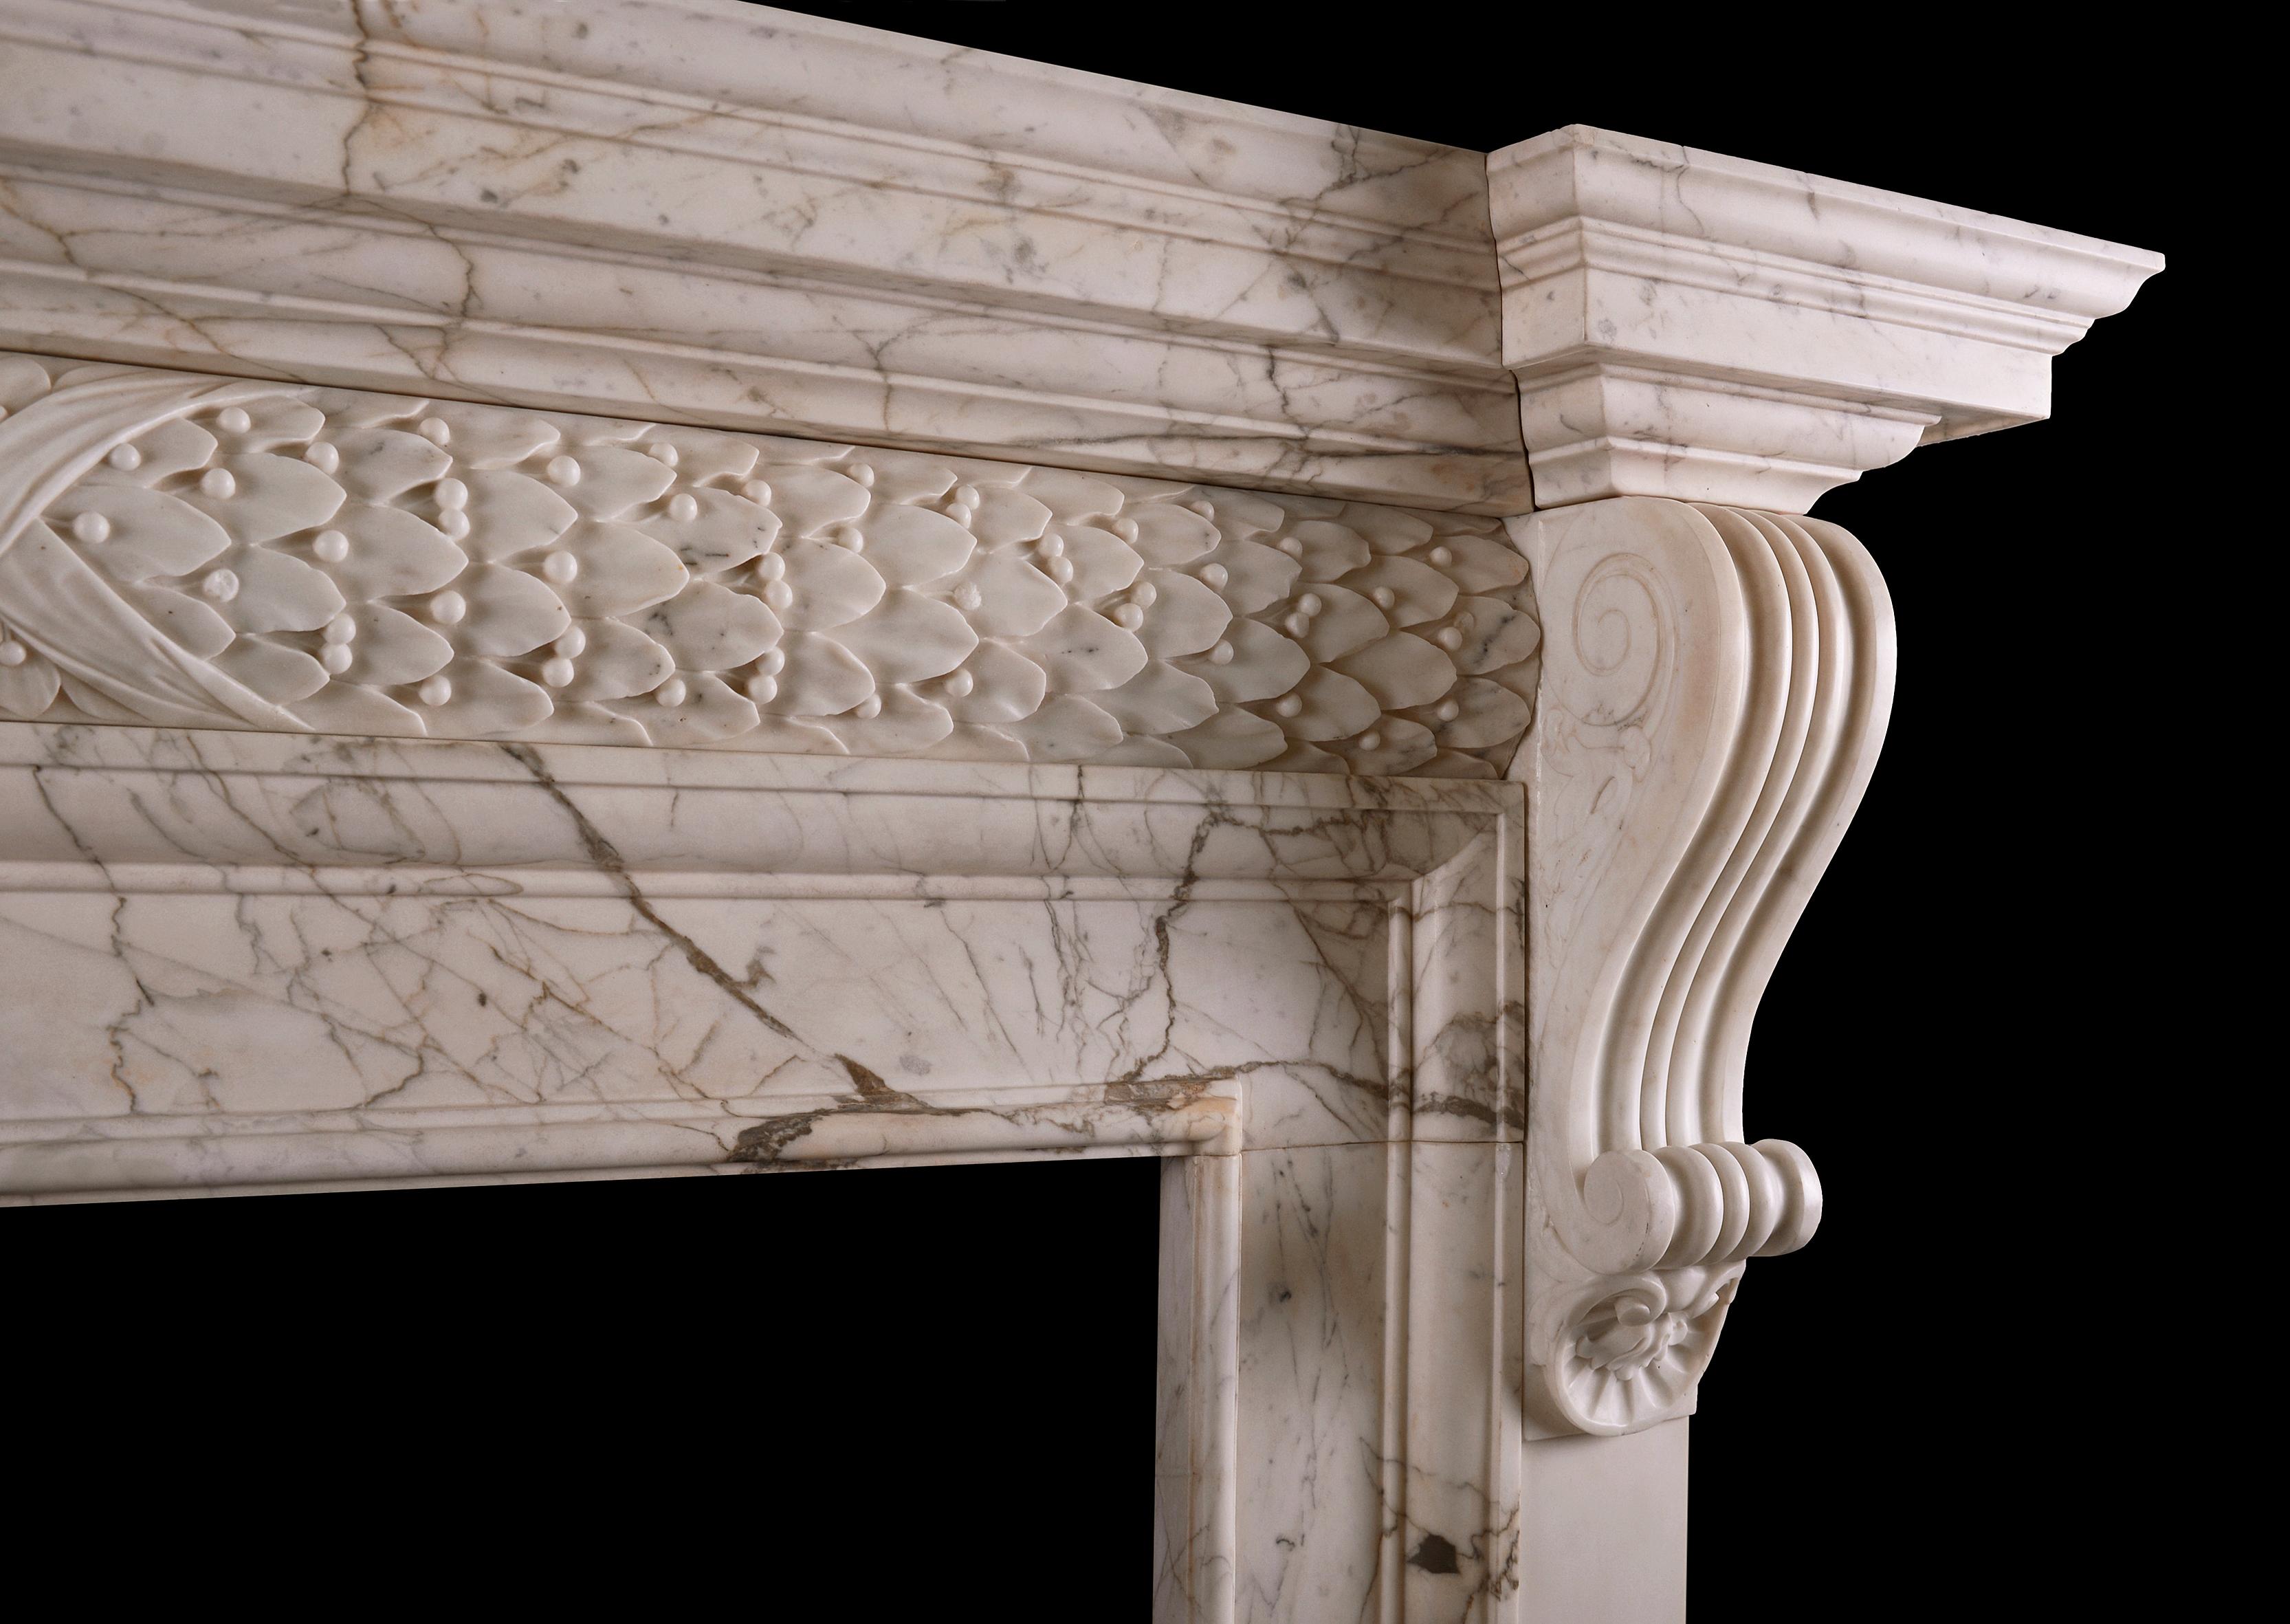 An imposing period Georgian fireplace in Calacatta Oro marble. The barrel frieze with foliage and berries throughout, tied with cross banded ribbons to centre. The jambs with scrolled carved brackets, surmounted by moulded breakfront shelf. 18th